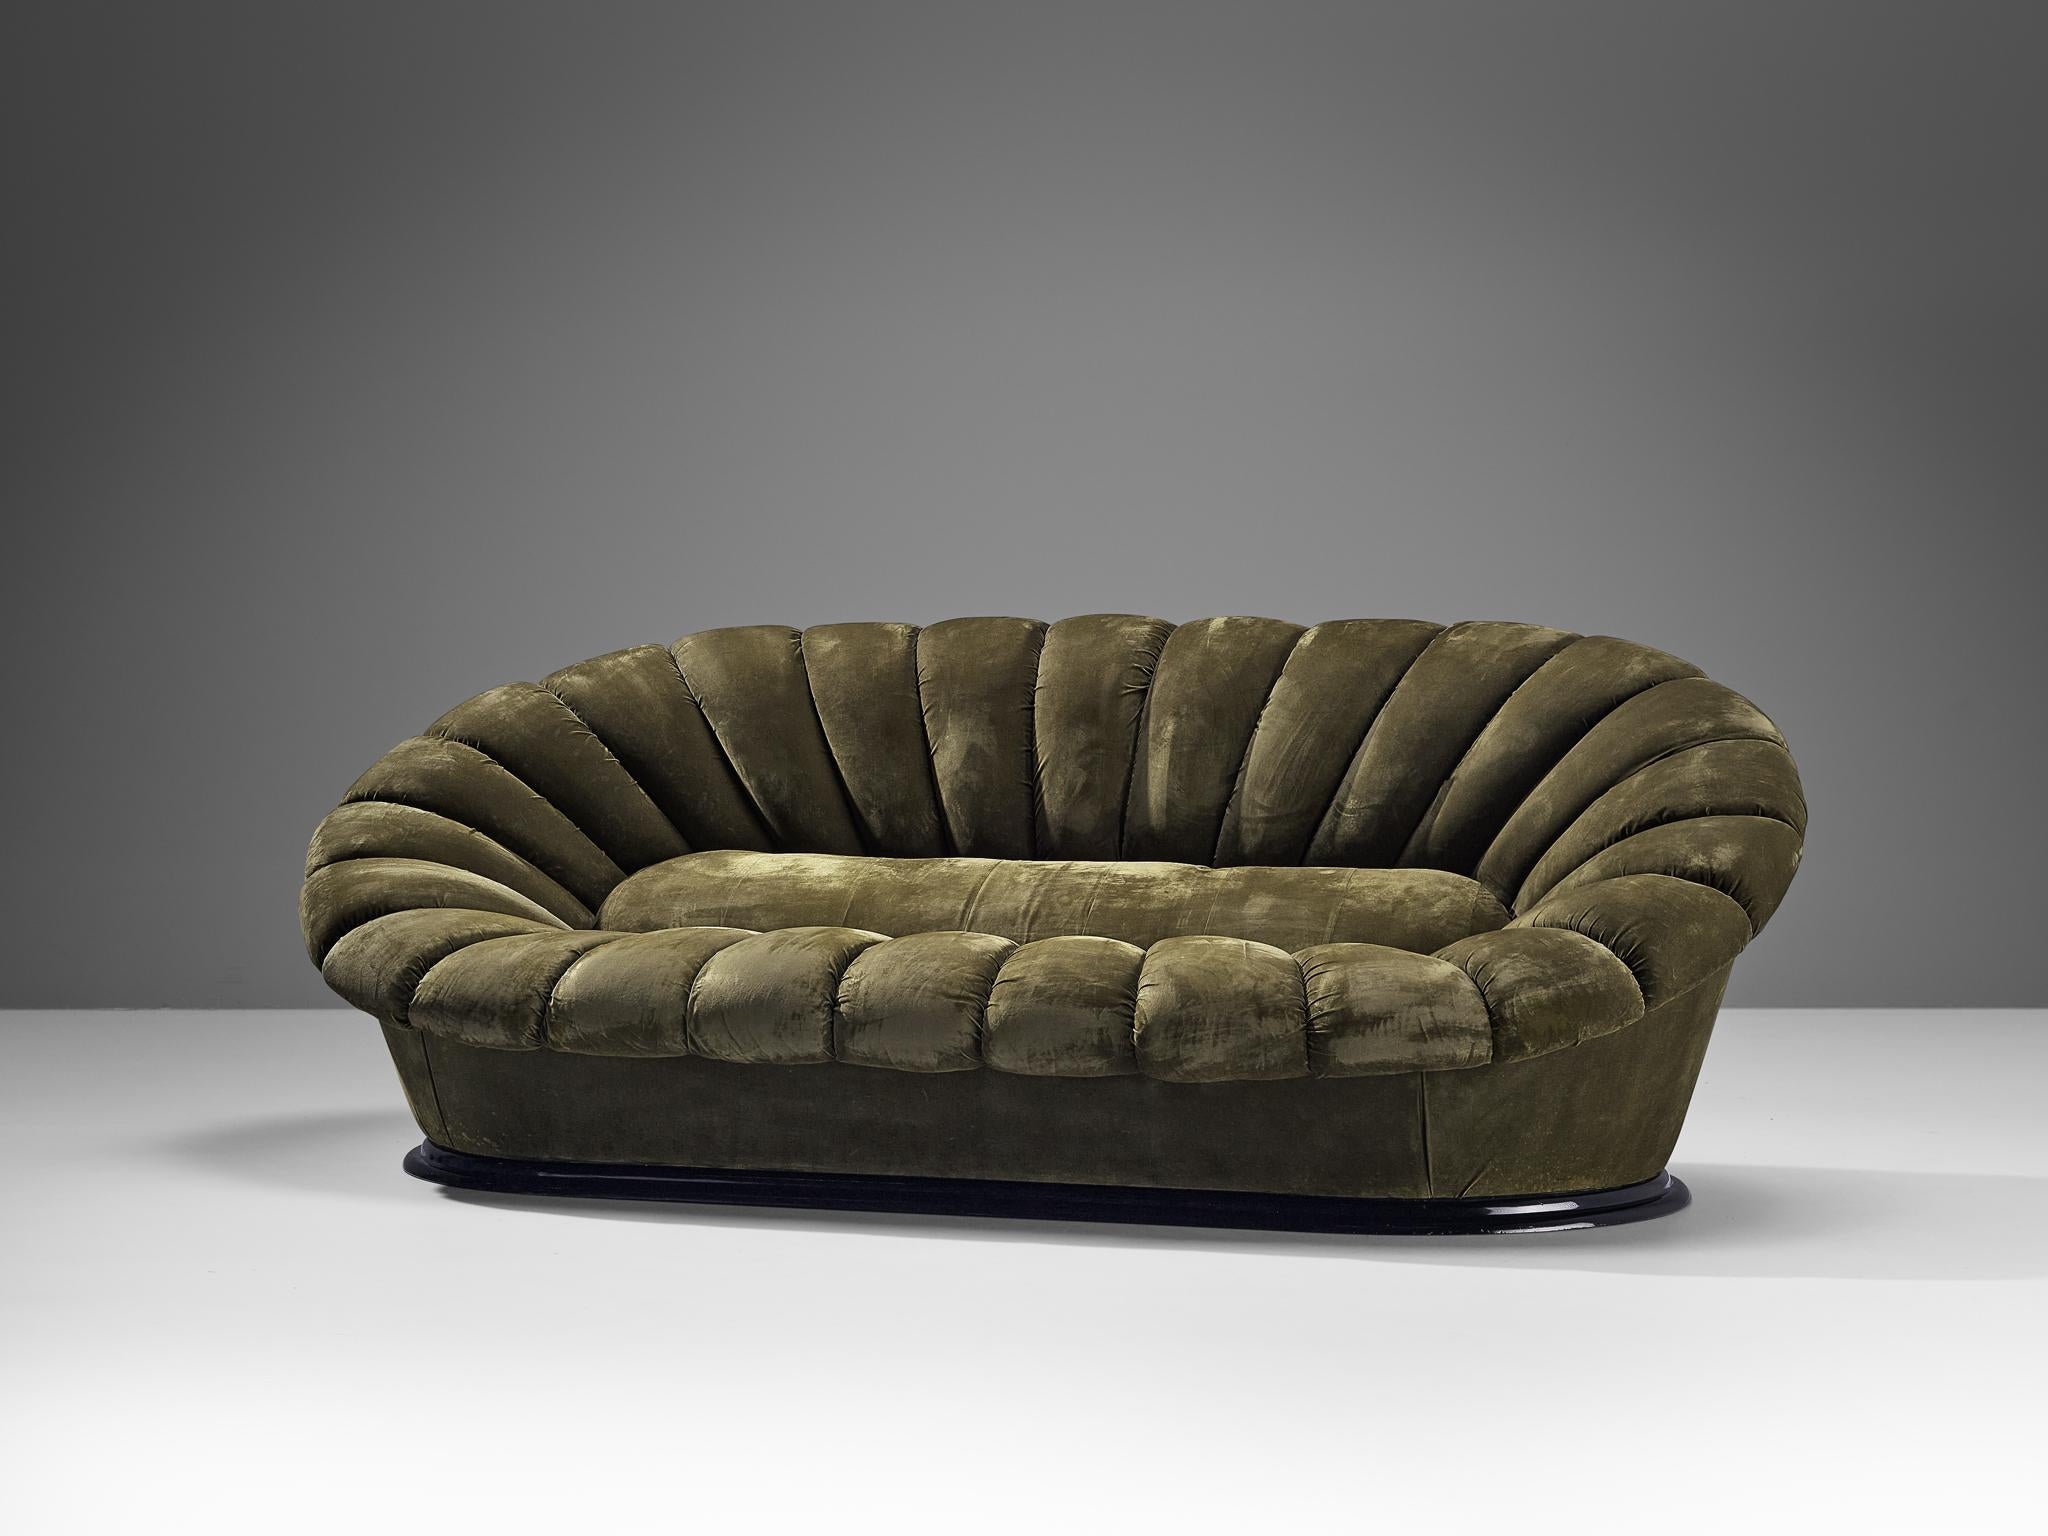 Sofa, velvet, plastic, Italy, 1970s

Eccentric and visually pleasing sofa of Italian origin. The construction of the sofa reminds of the anatomy of the flower with its inward-facing tufted lines and a stuffed middle section. The whole unit is